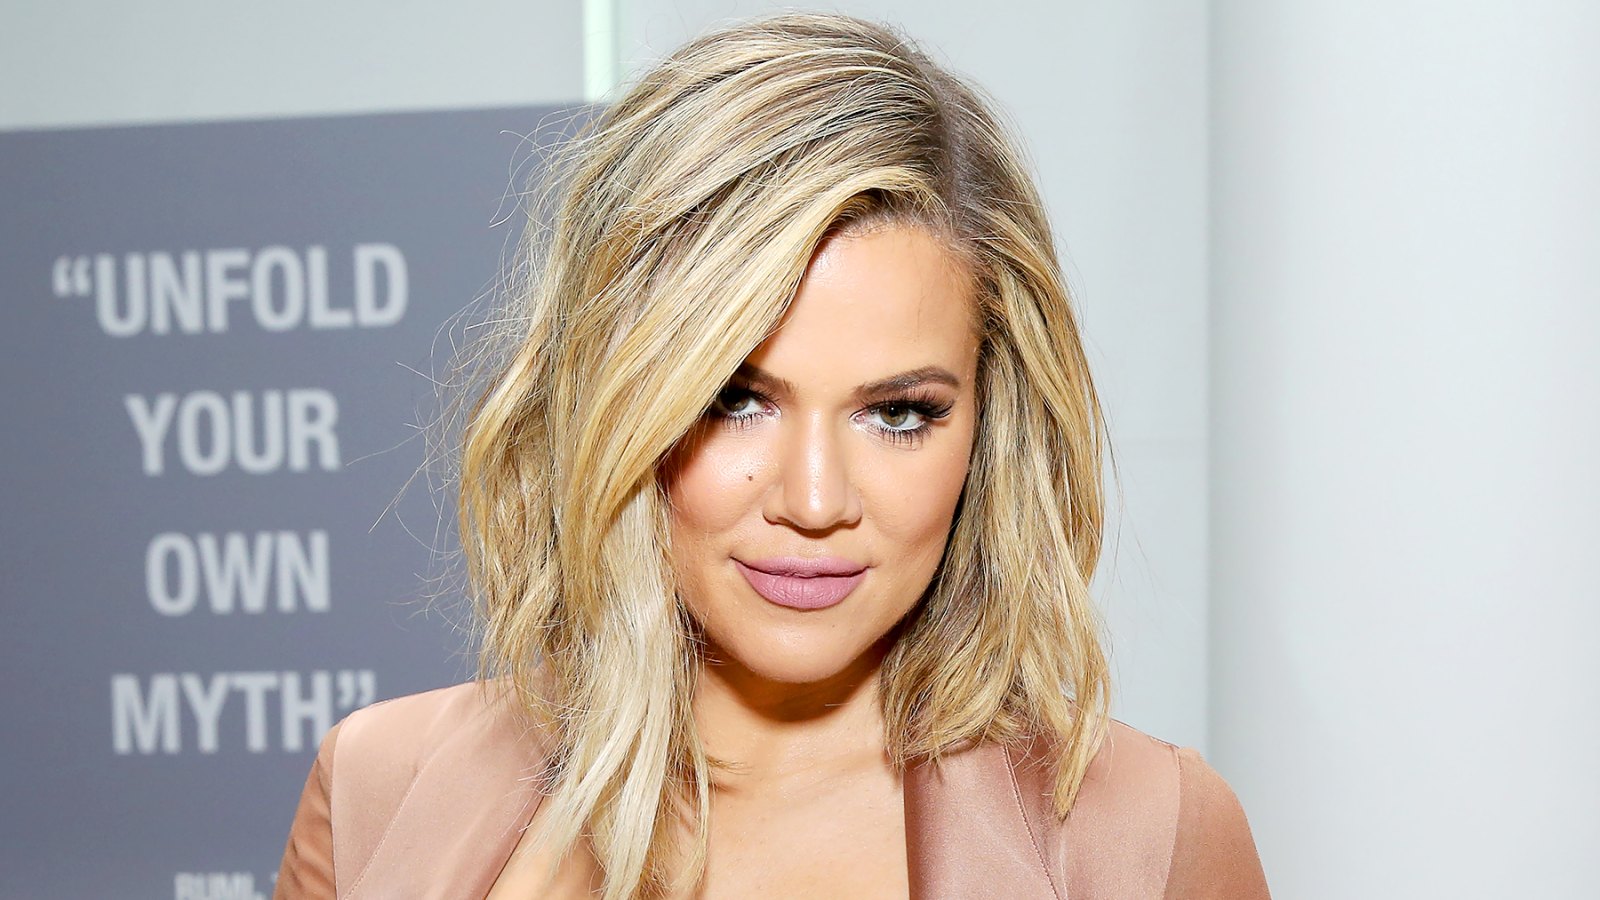 Khloe Kardashian Will Pass Down This Parenting Tip From Her Late